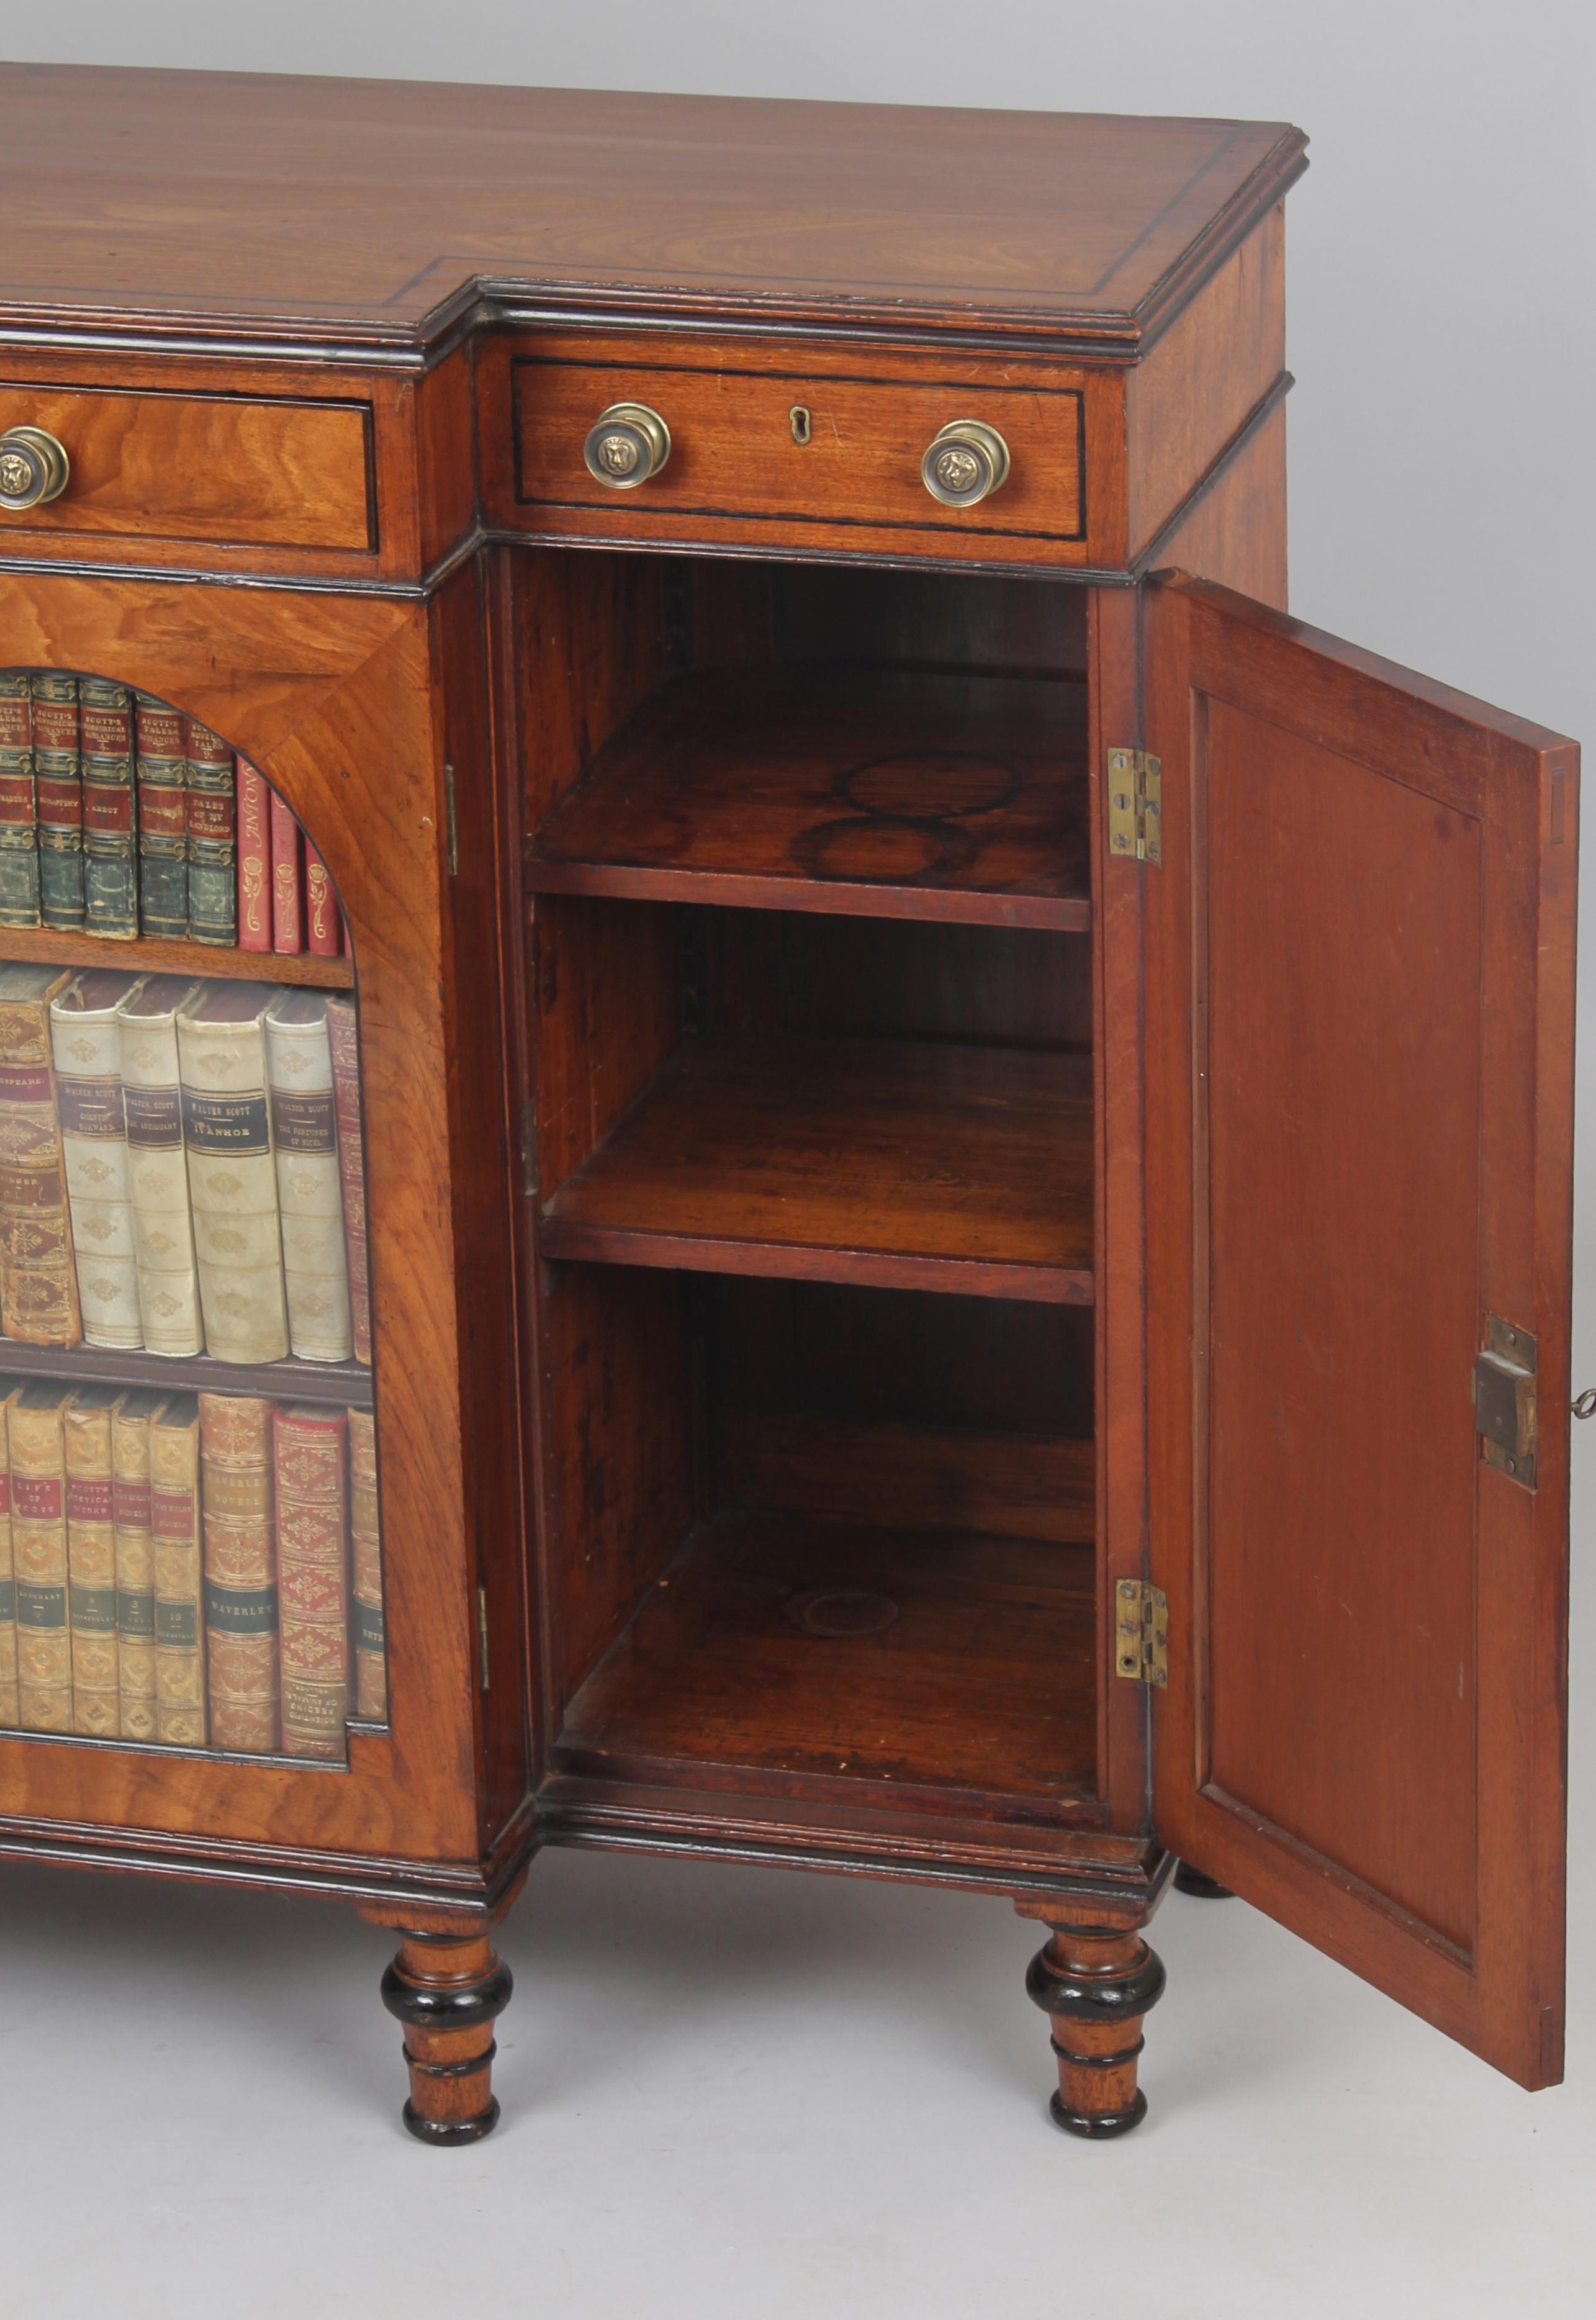 George IV small mahogany breakfront side-cabinet; the central cupboard with two adjustable shelves enclosed by doors with arched glazing, flanked by narrow cupboards with panelled doors; the frieze with a drawer fitted with a hinged writing-flap, a